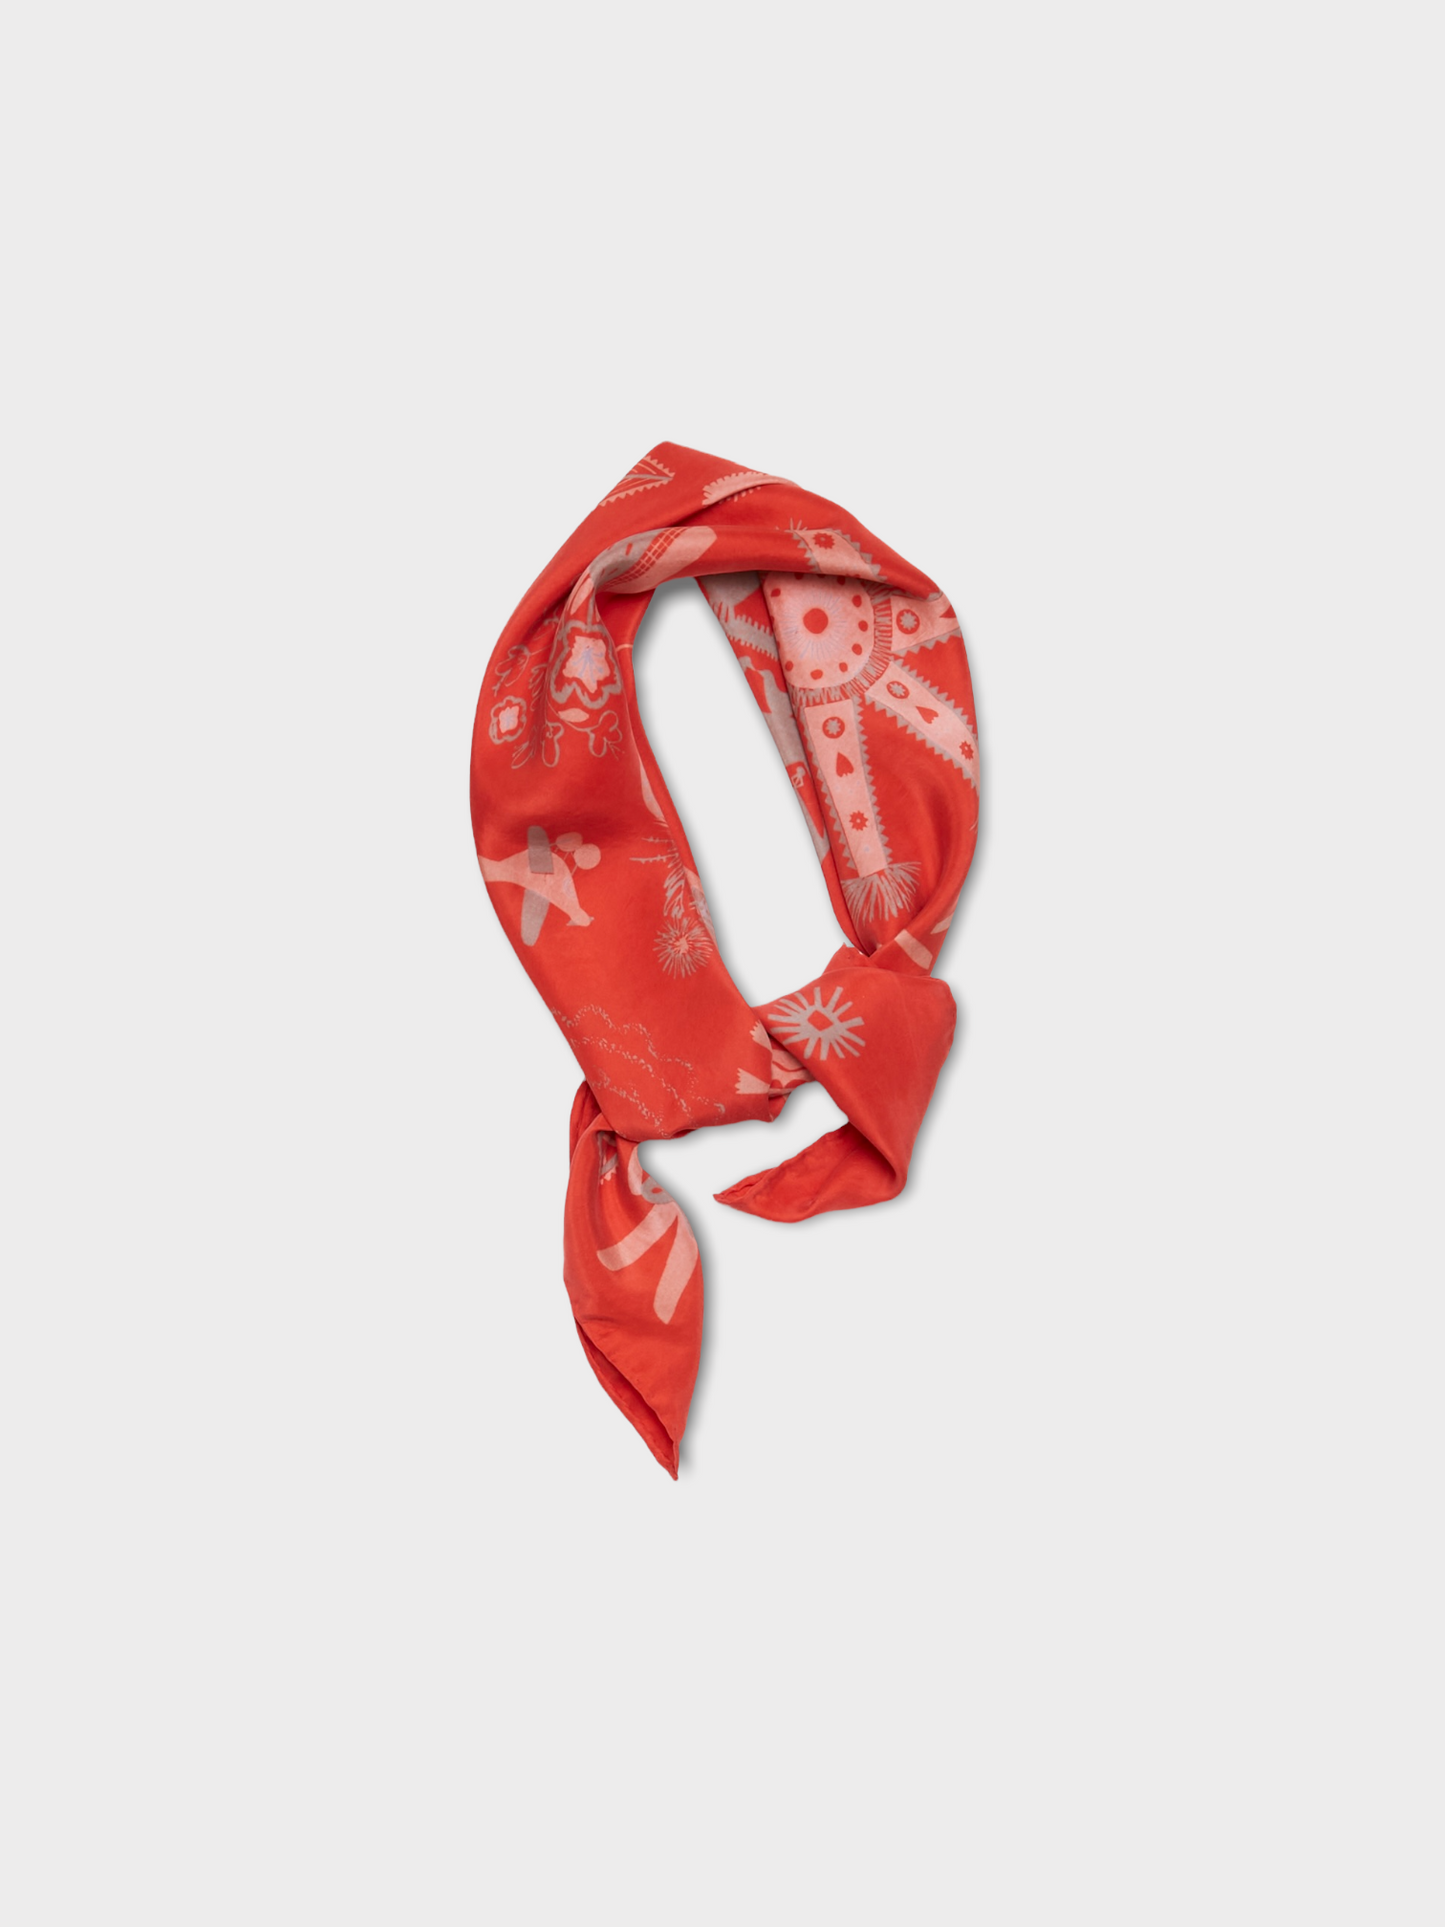 Folka Scarf in Red & Peach (Seconds) by Caitlin Hinshelwood